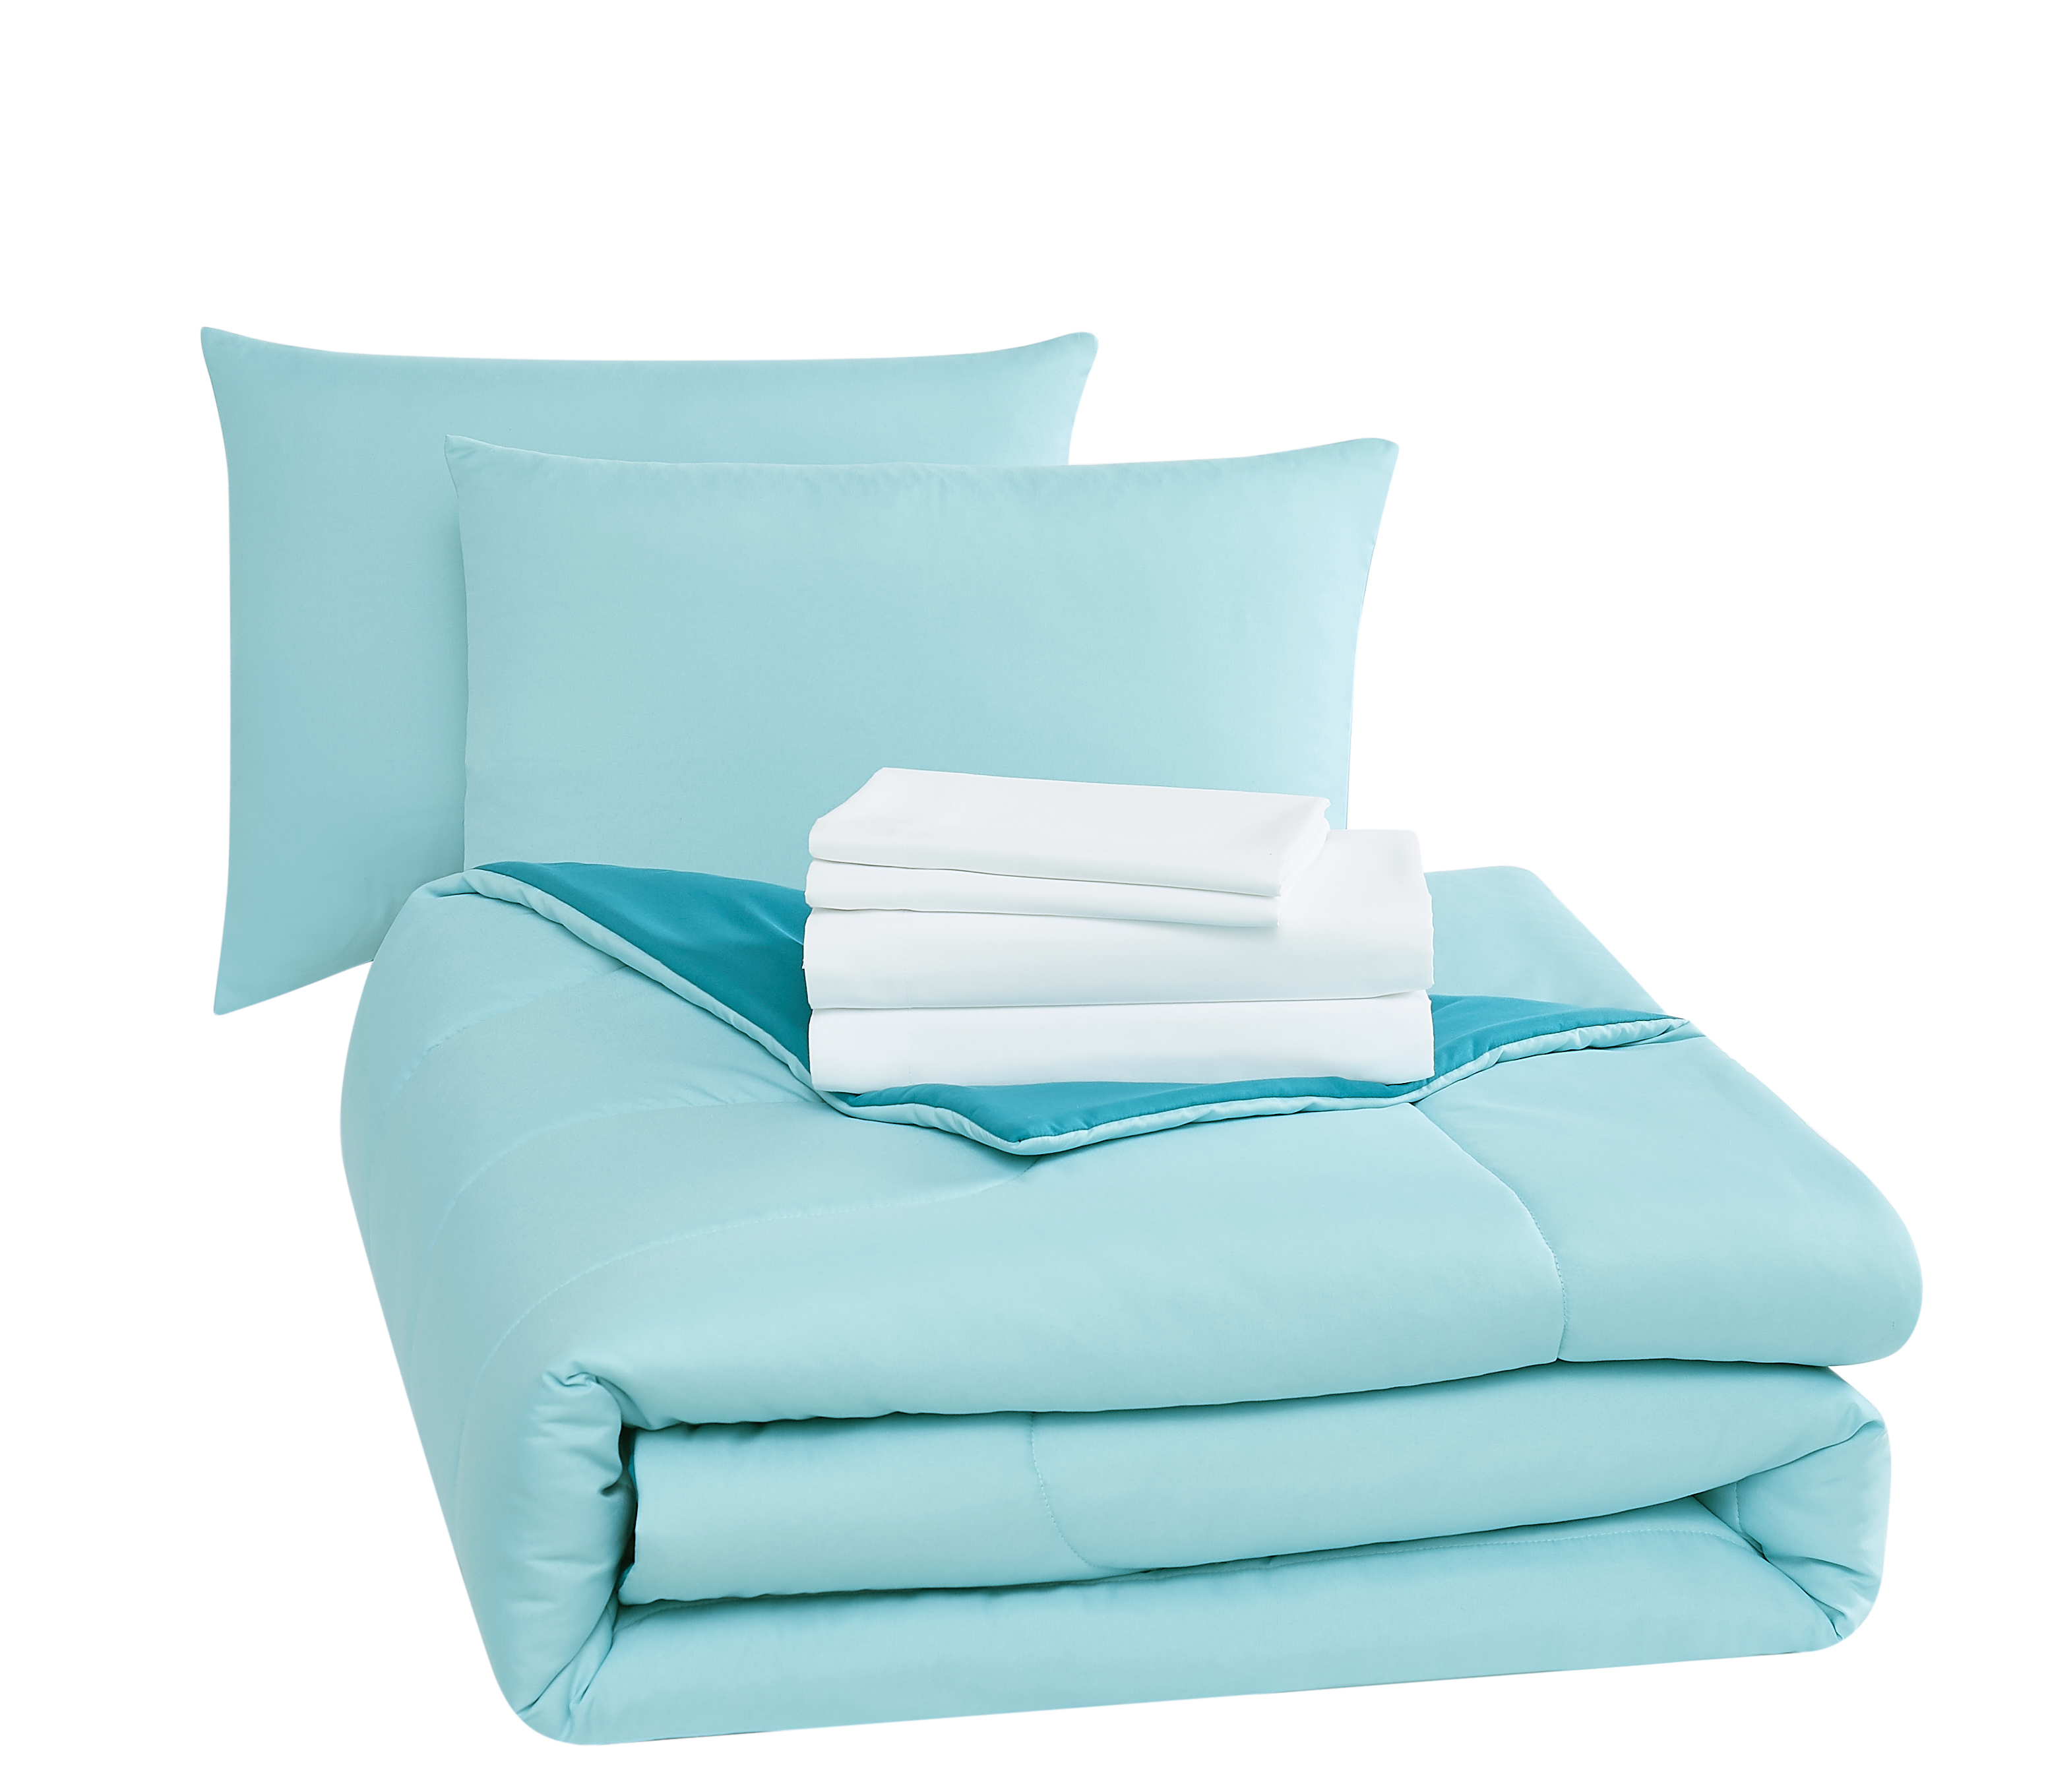 Mainstays Teal Reversible 7-Piece Bed in a Bag Comforter Set with Sheets, Queen - image 5 of 8